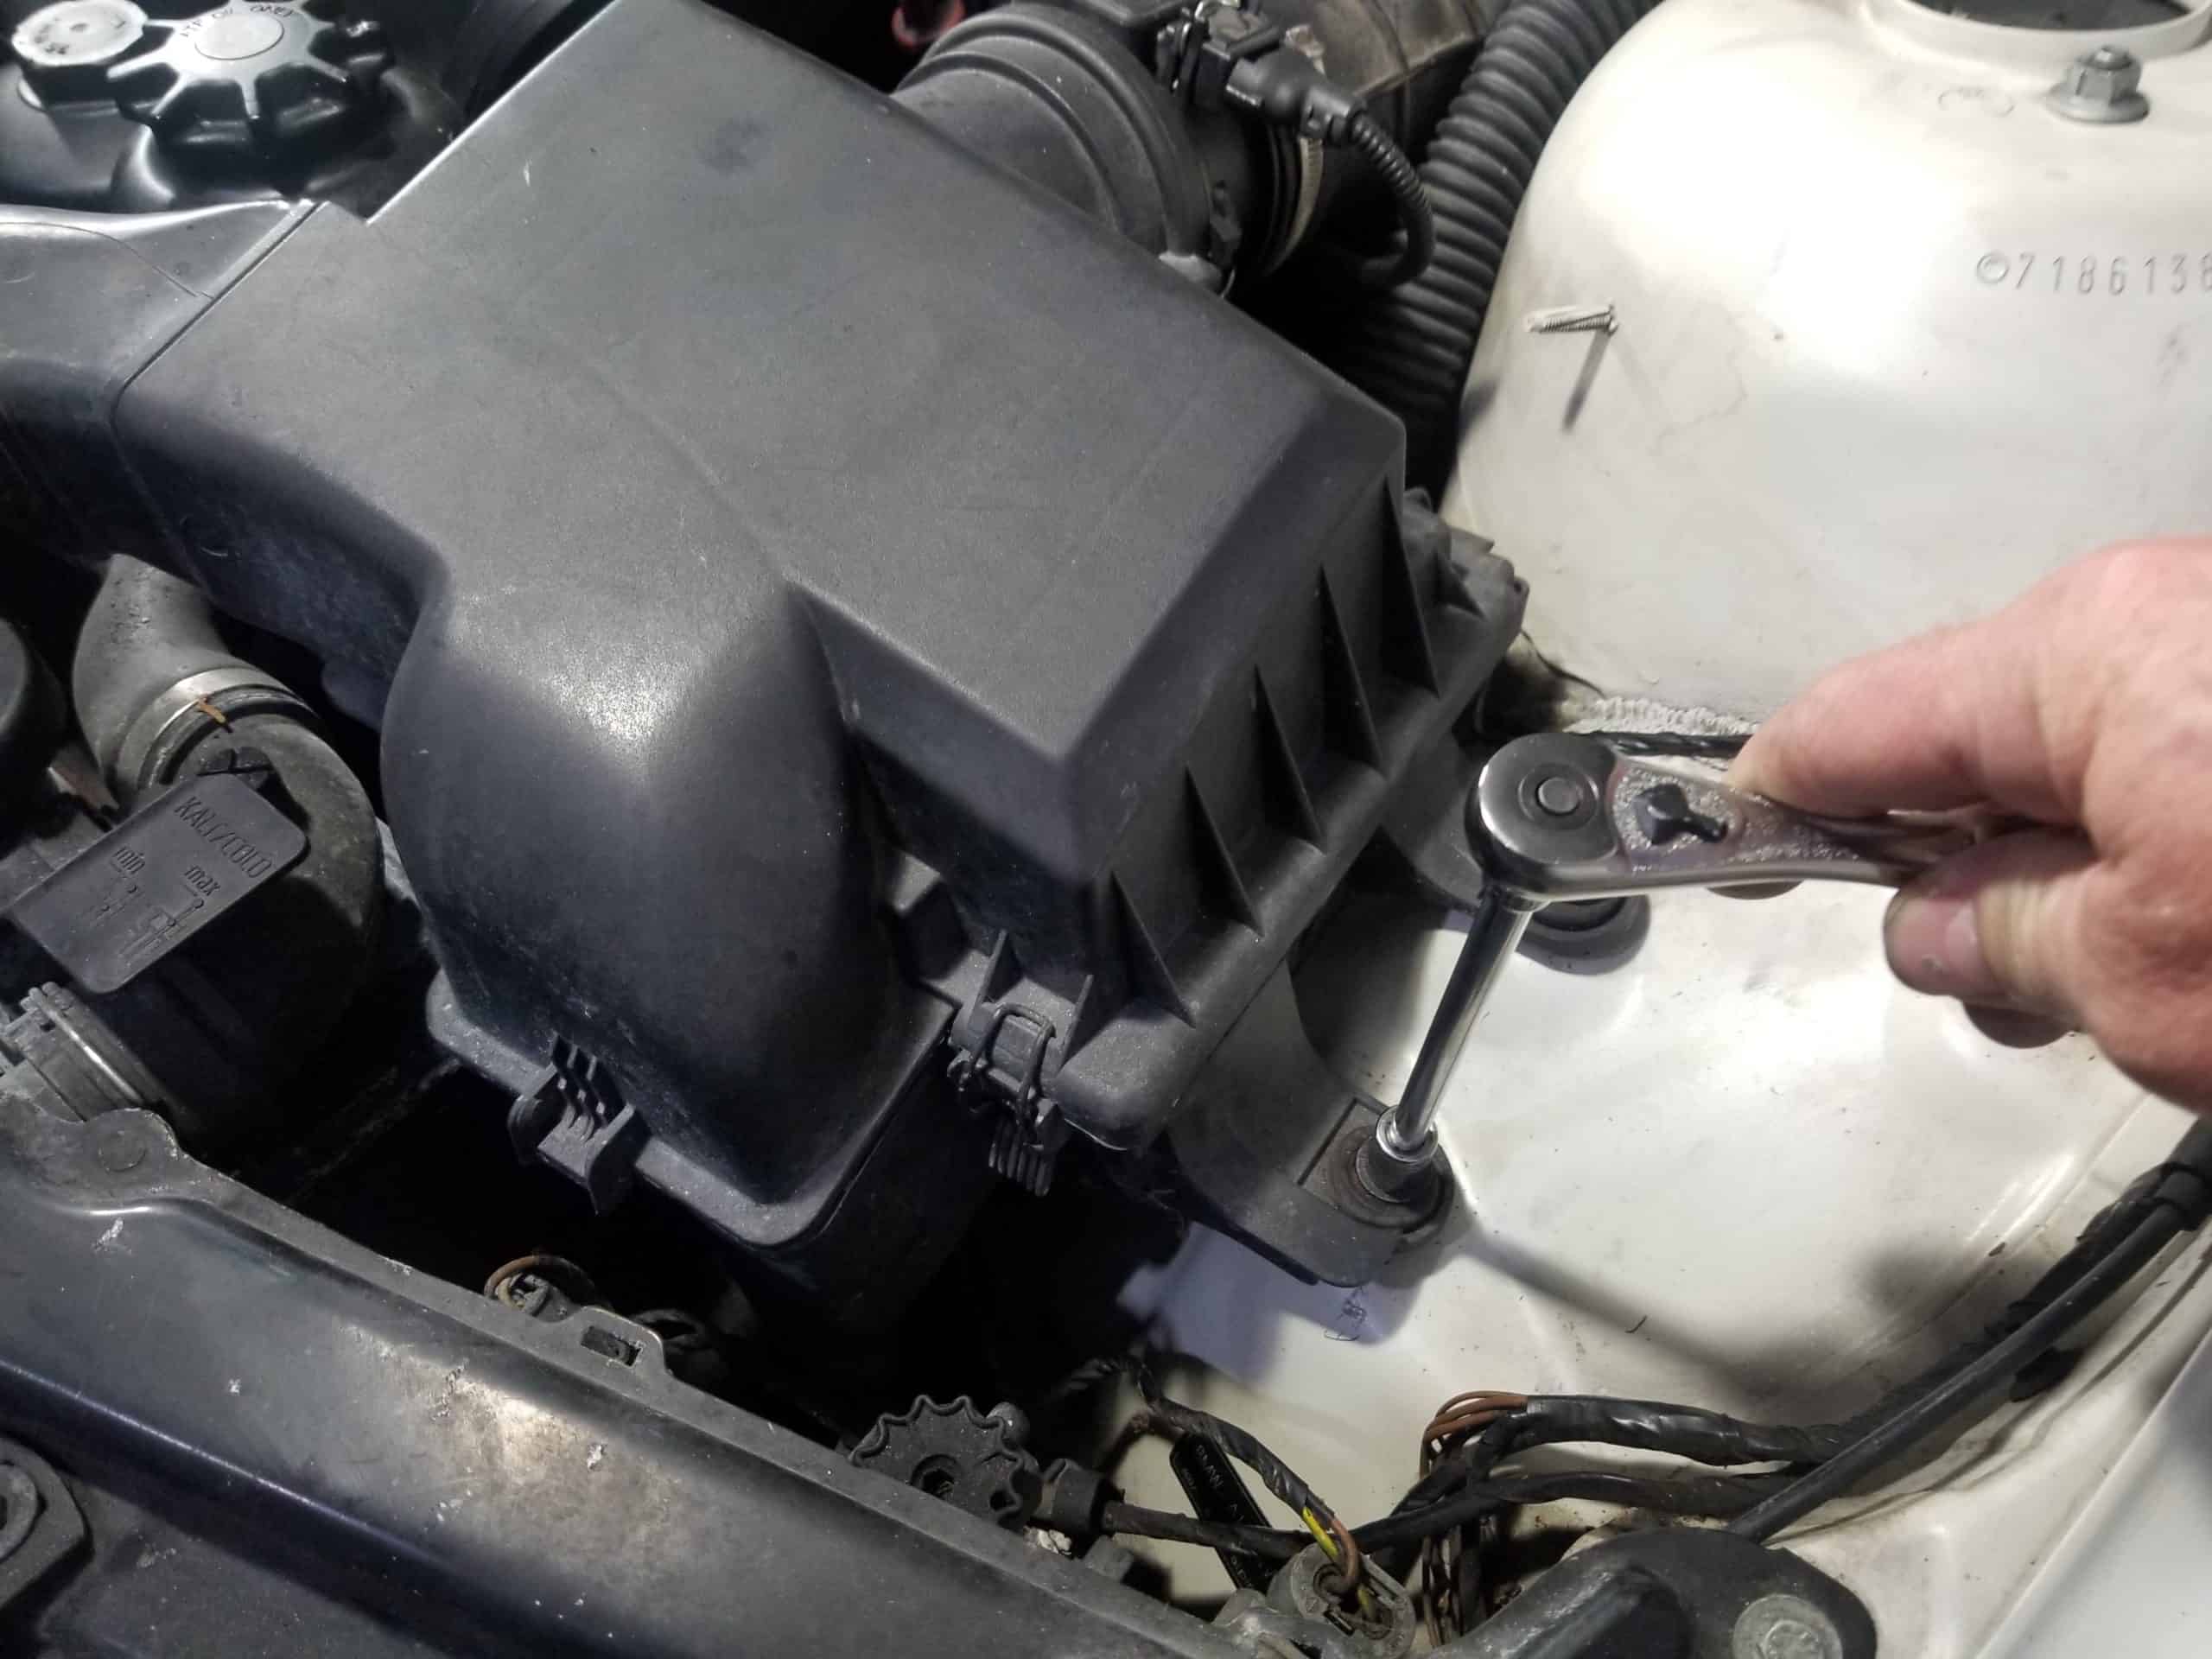 bmw m52 intake manifold removal - Remove the intake muffler from the vehicle.